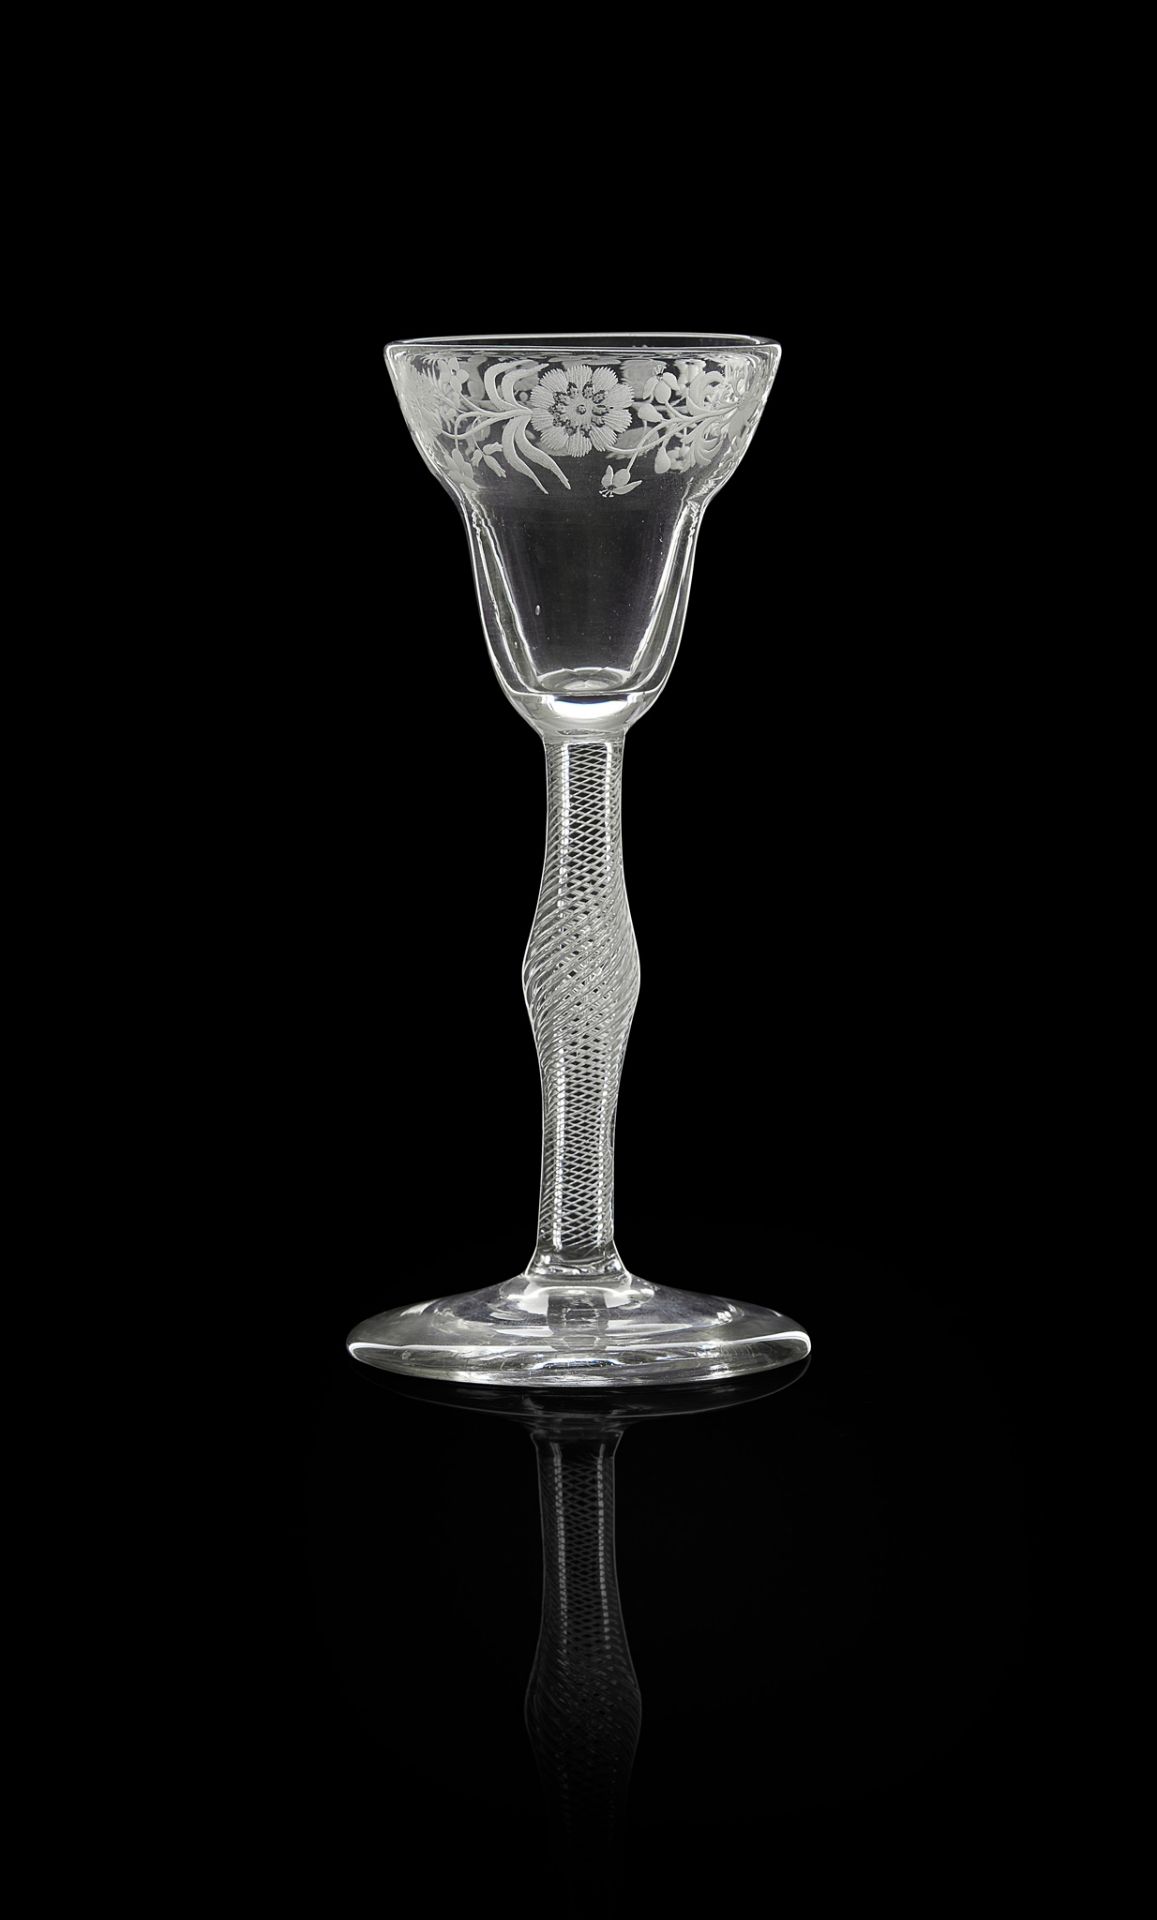 A JACOBITE WINE GLASS LATE 18TH CENTURY - Image 2 of 2